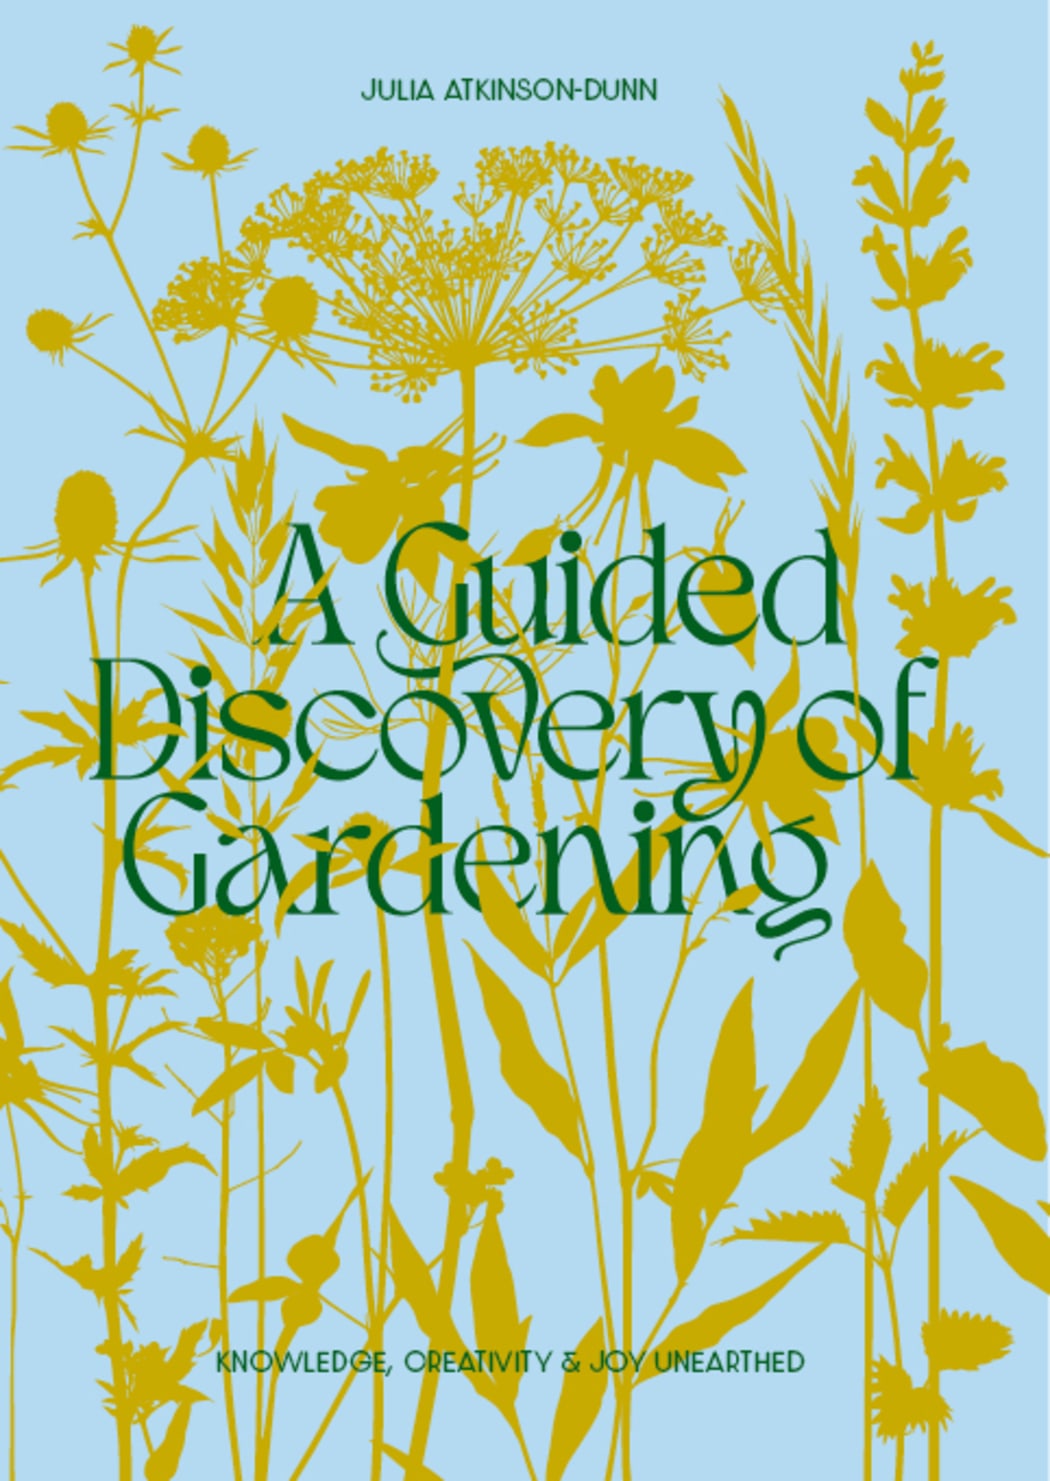 A Guided Discovery of Gardening book cover